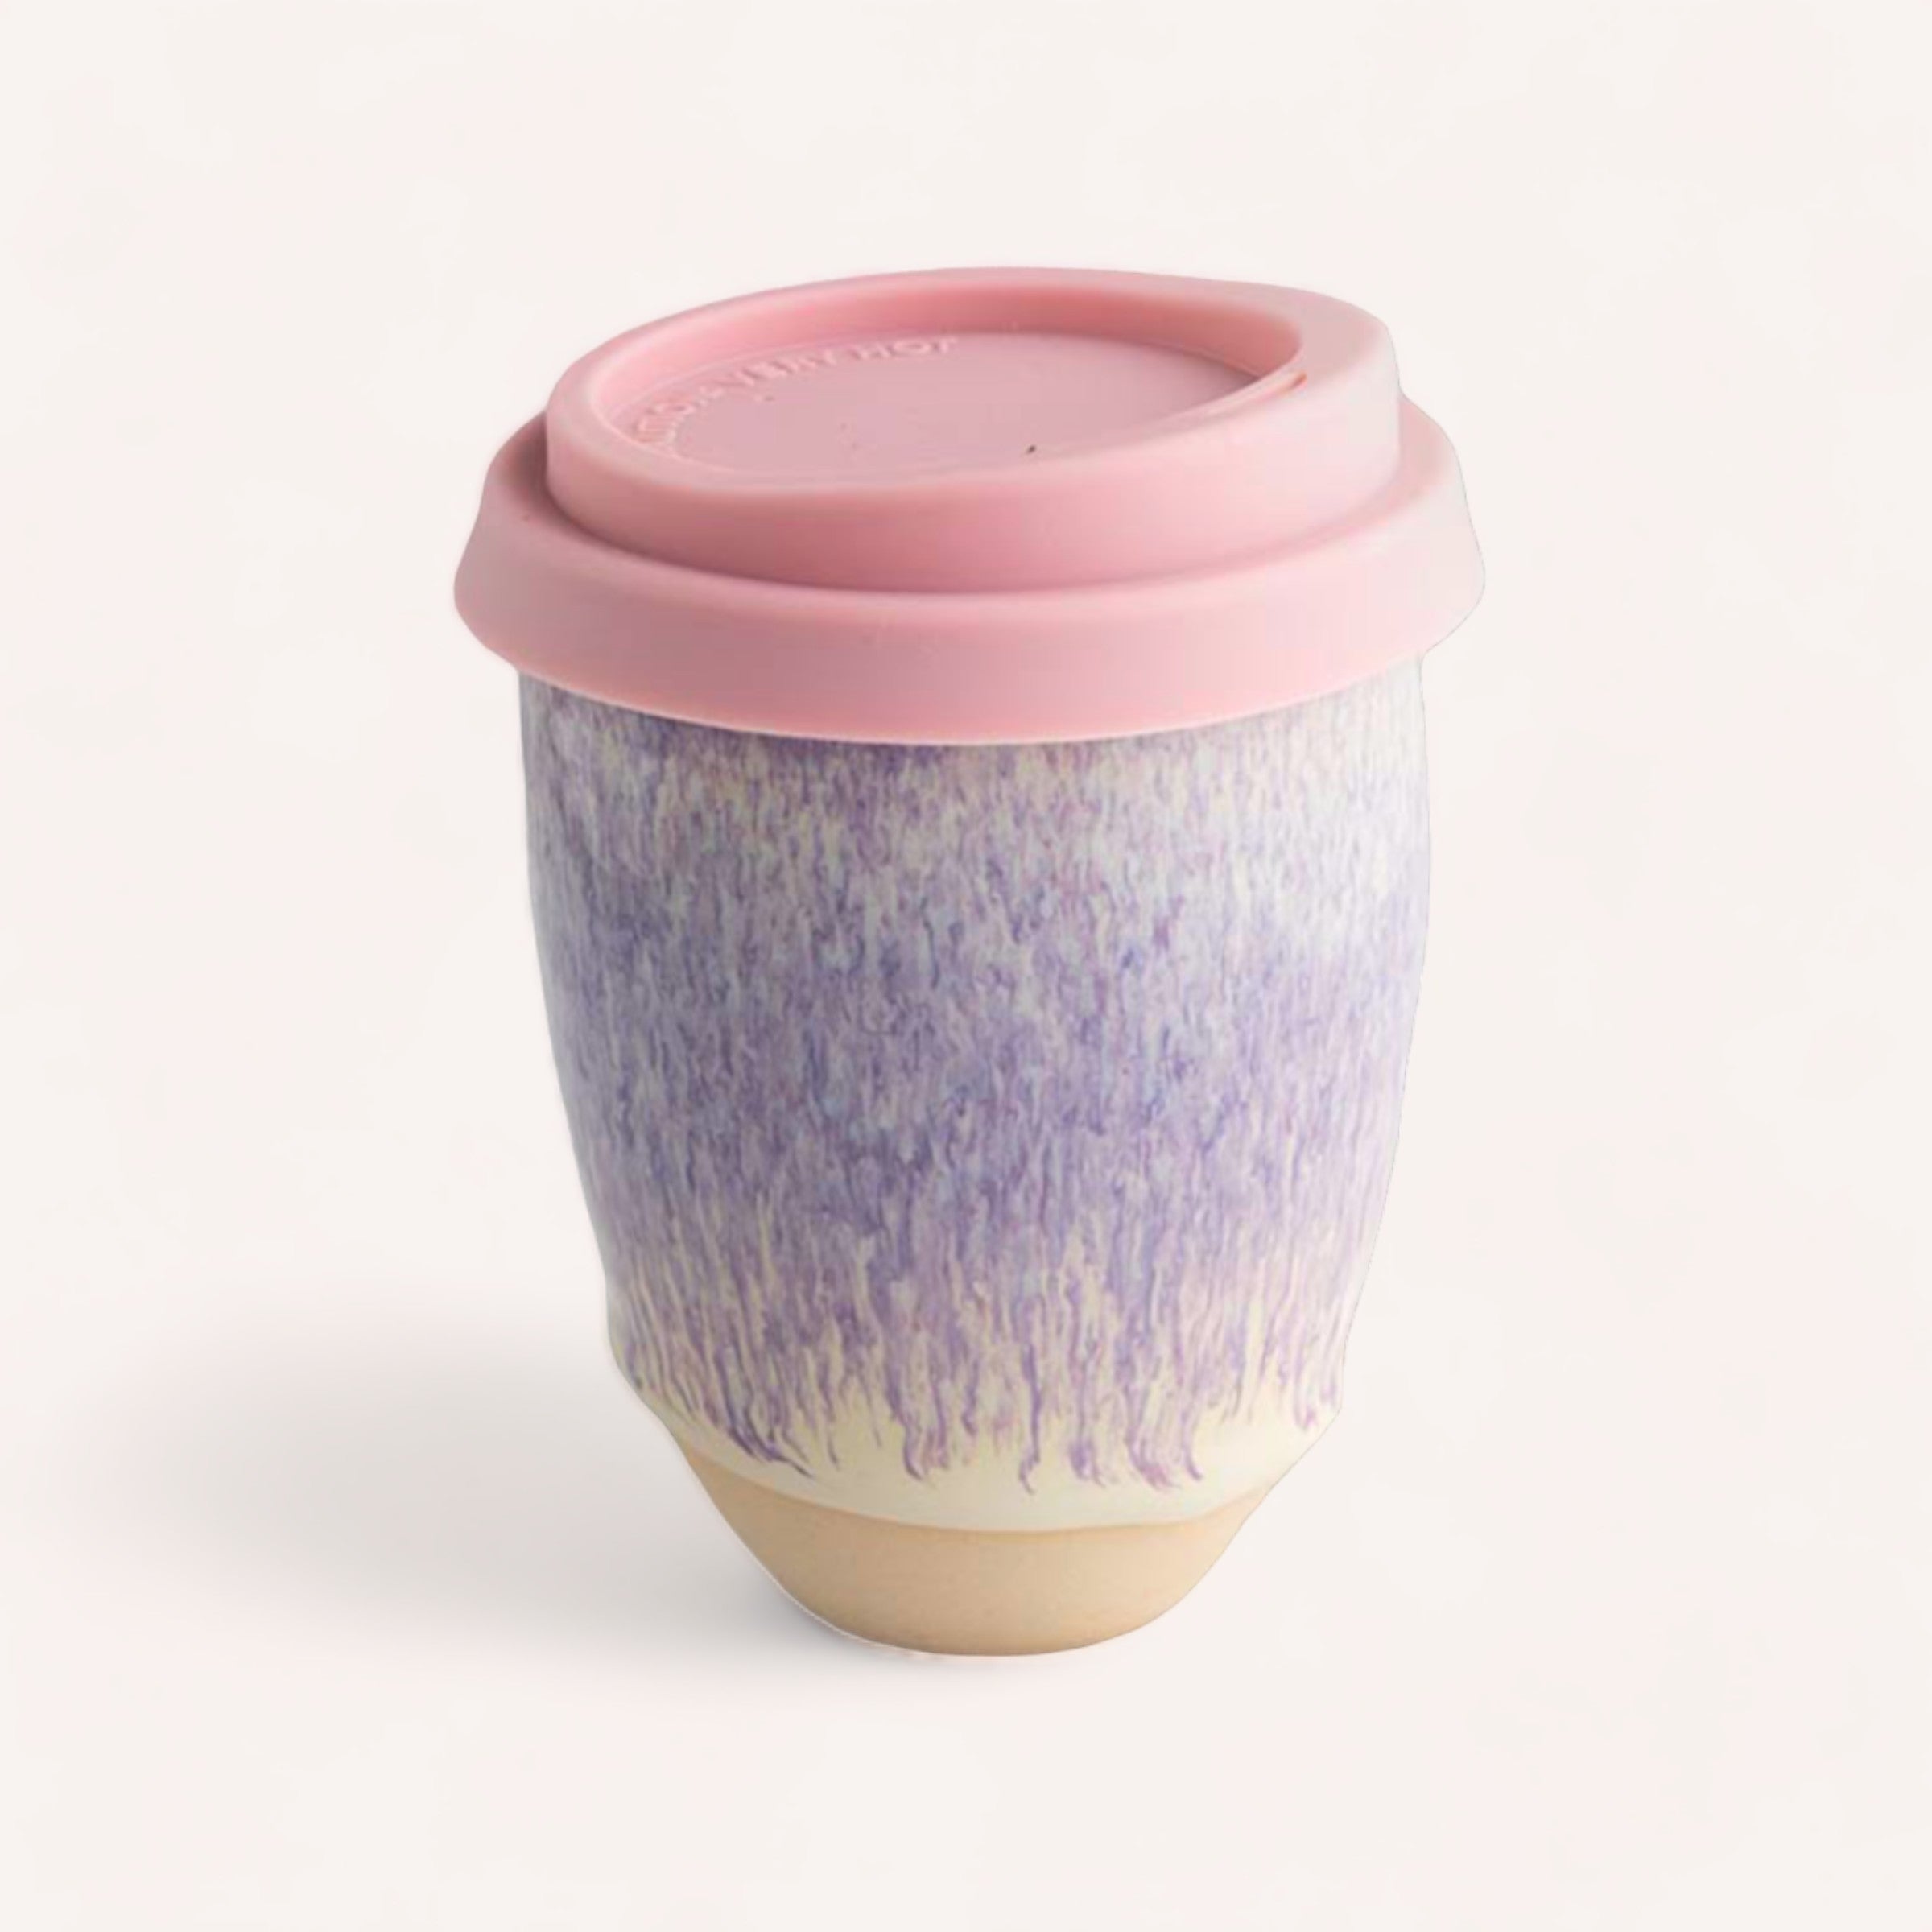 A handcrafted Ceramic Keep Cup by Sam Mayell with a lavender and white gradient design and a pink silicone lid, against a plain white background.